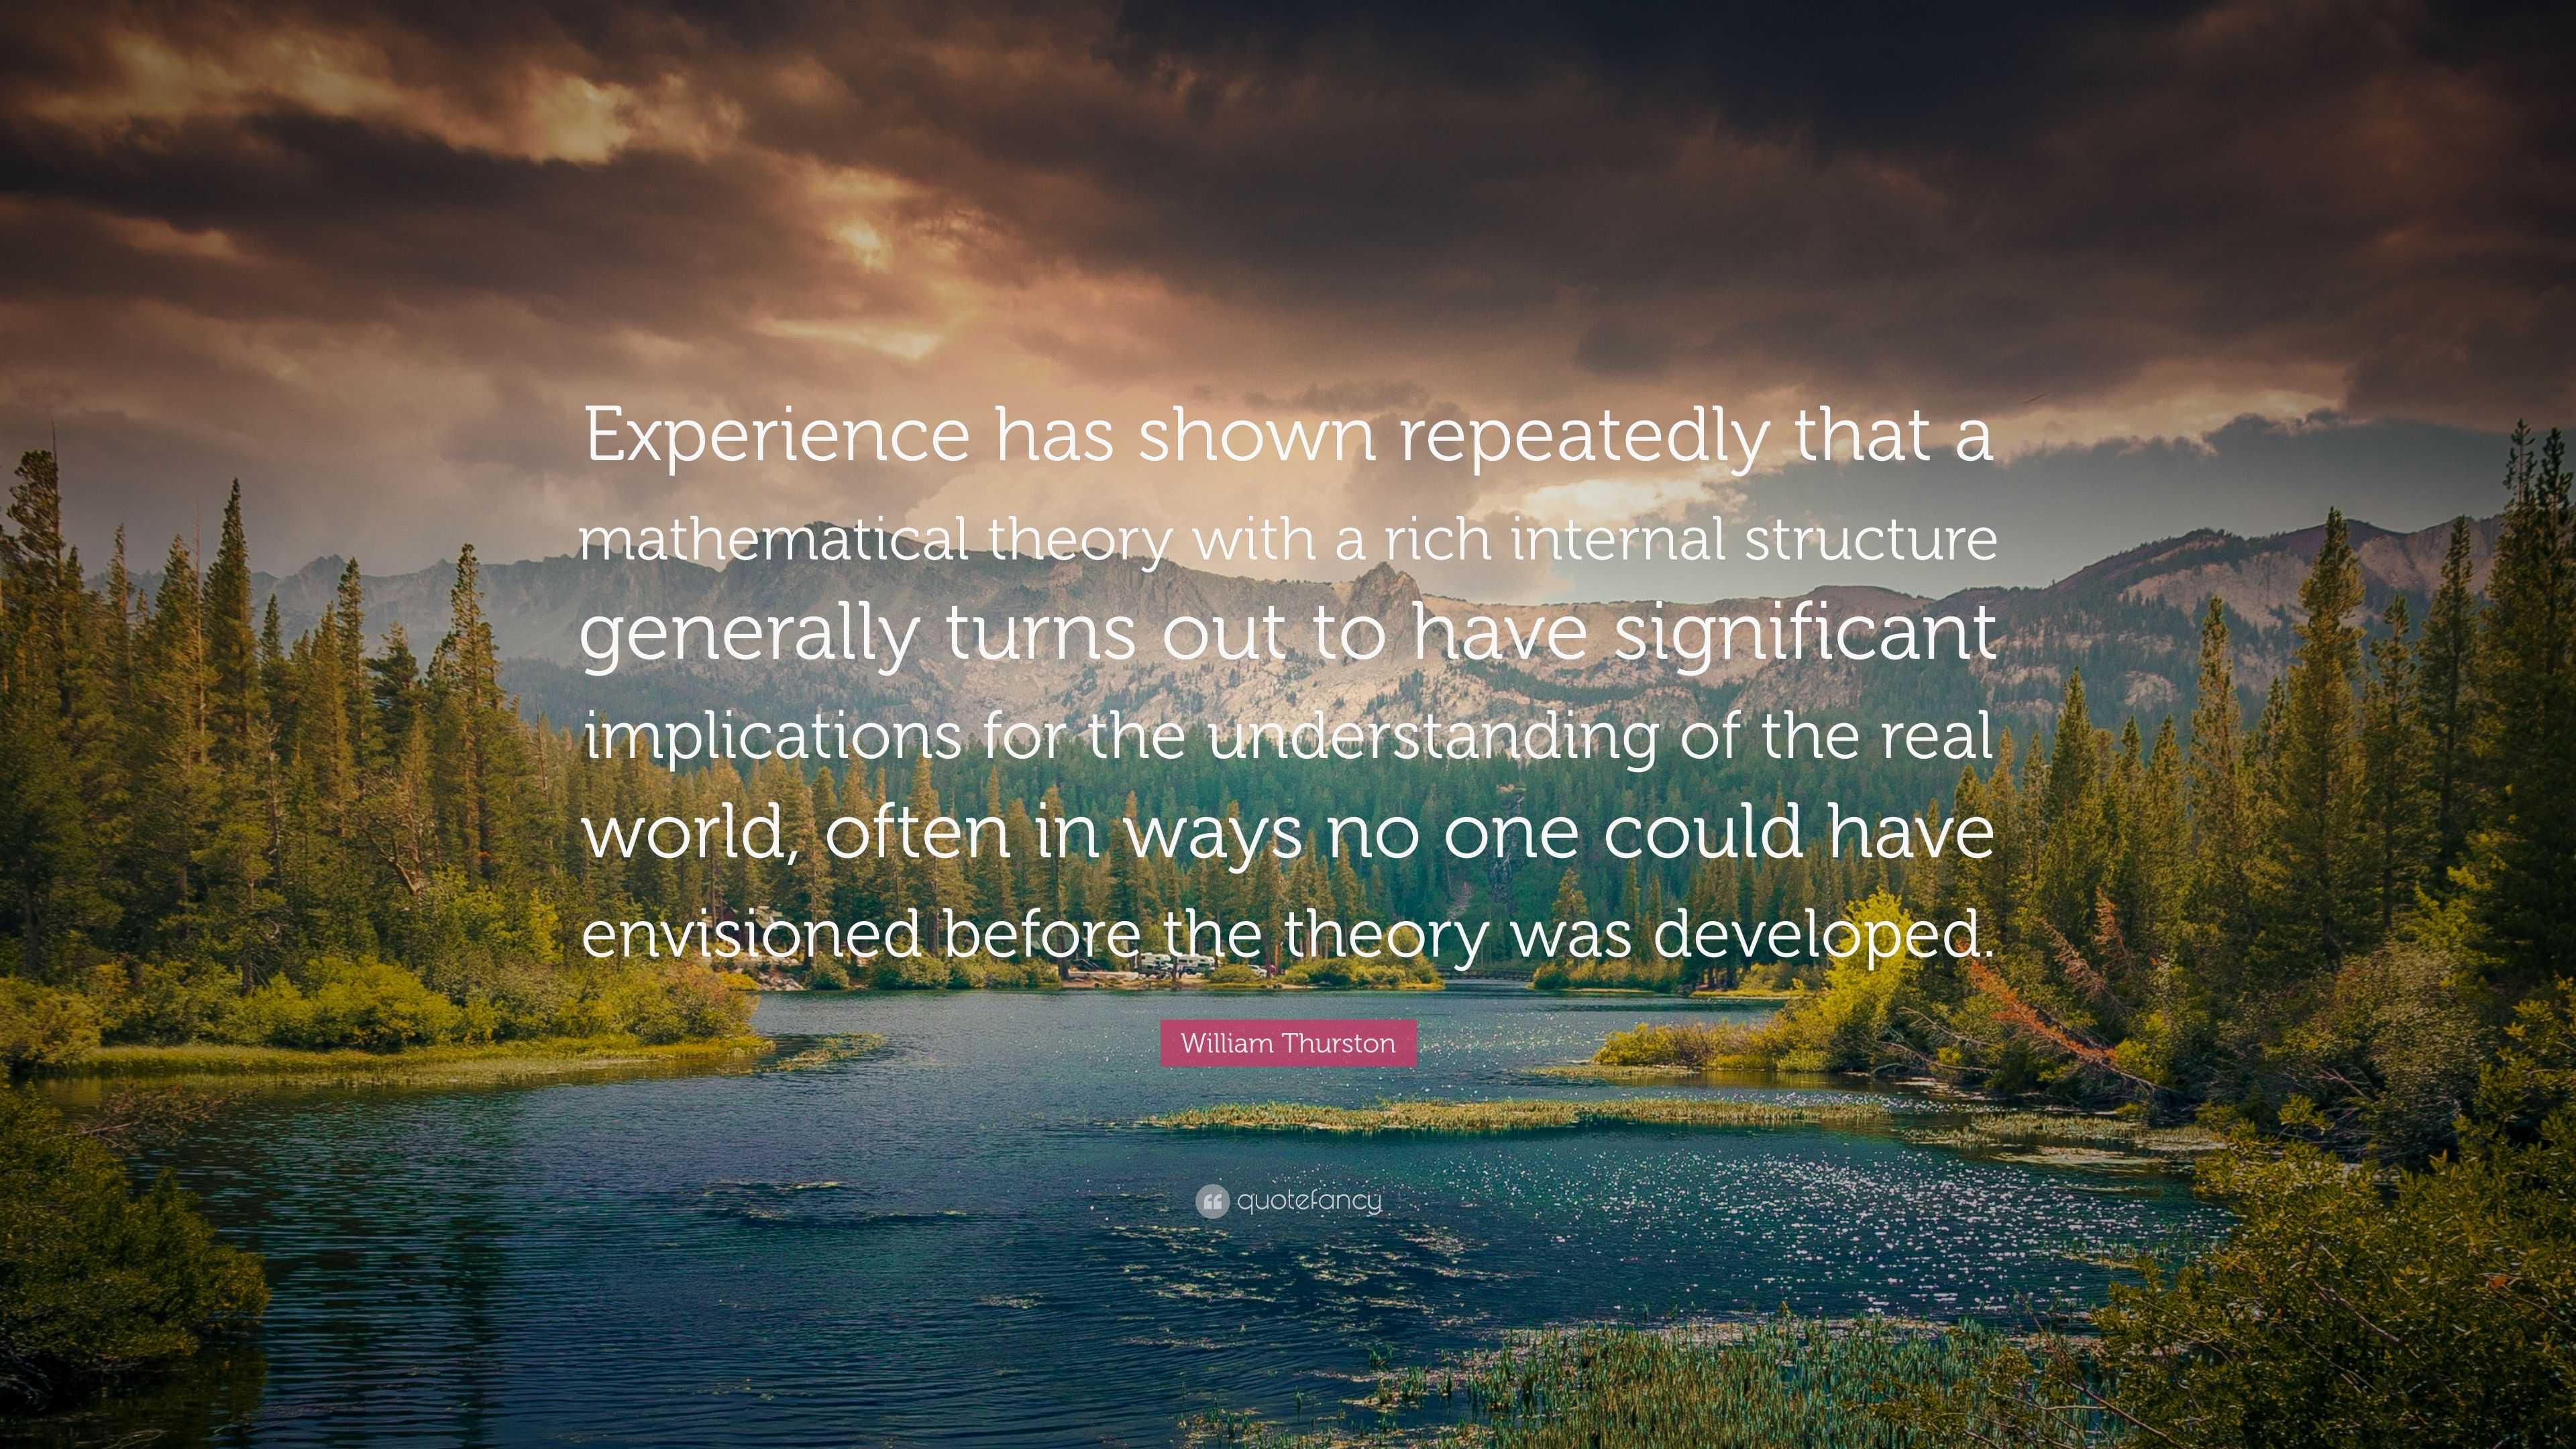 William Thurston Quote: “Experience has shown repeatedly that a ...